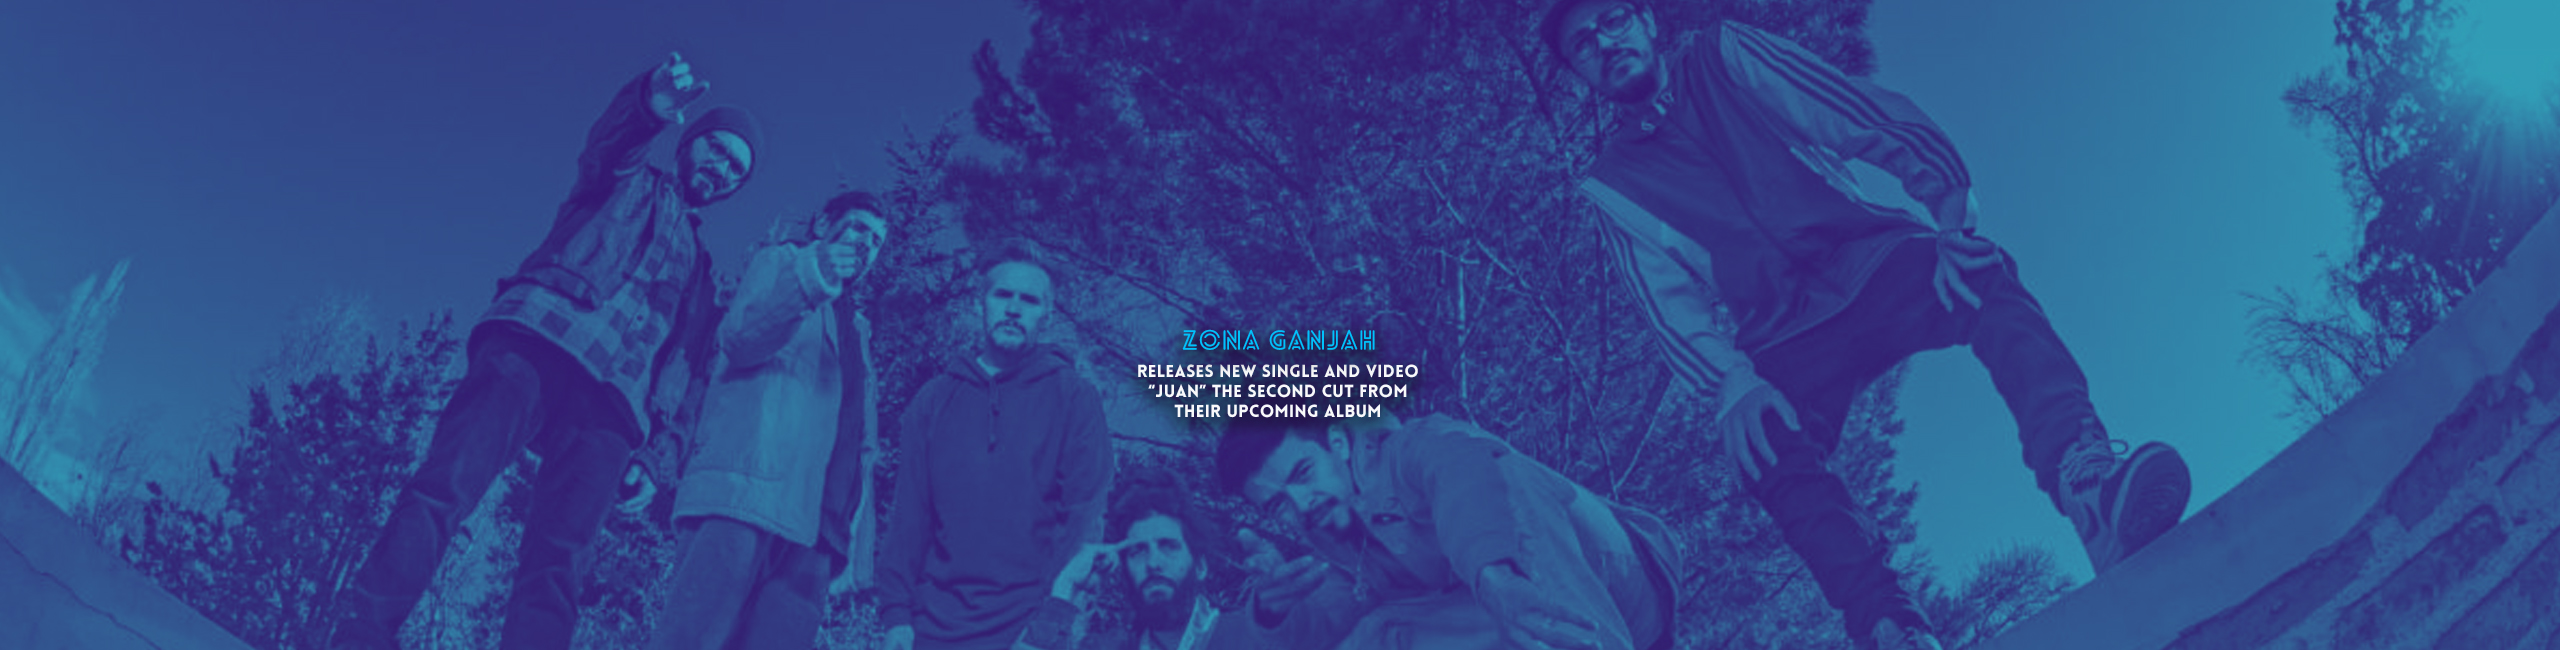 ZONA GANJAH: Releases New Single and Video “Juan” the Second Cut from Their Upcoming Album